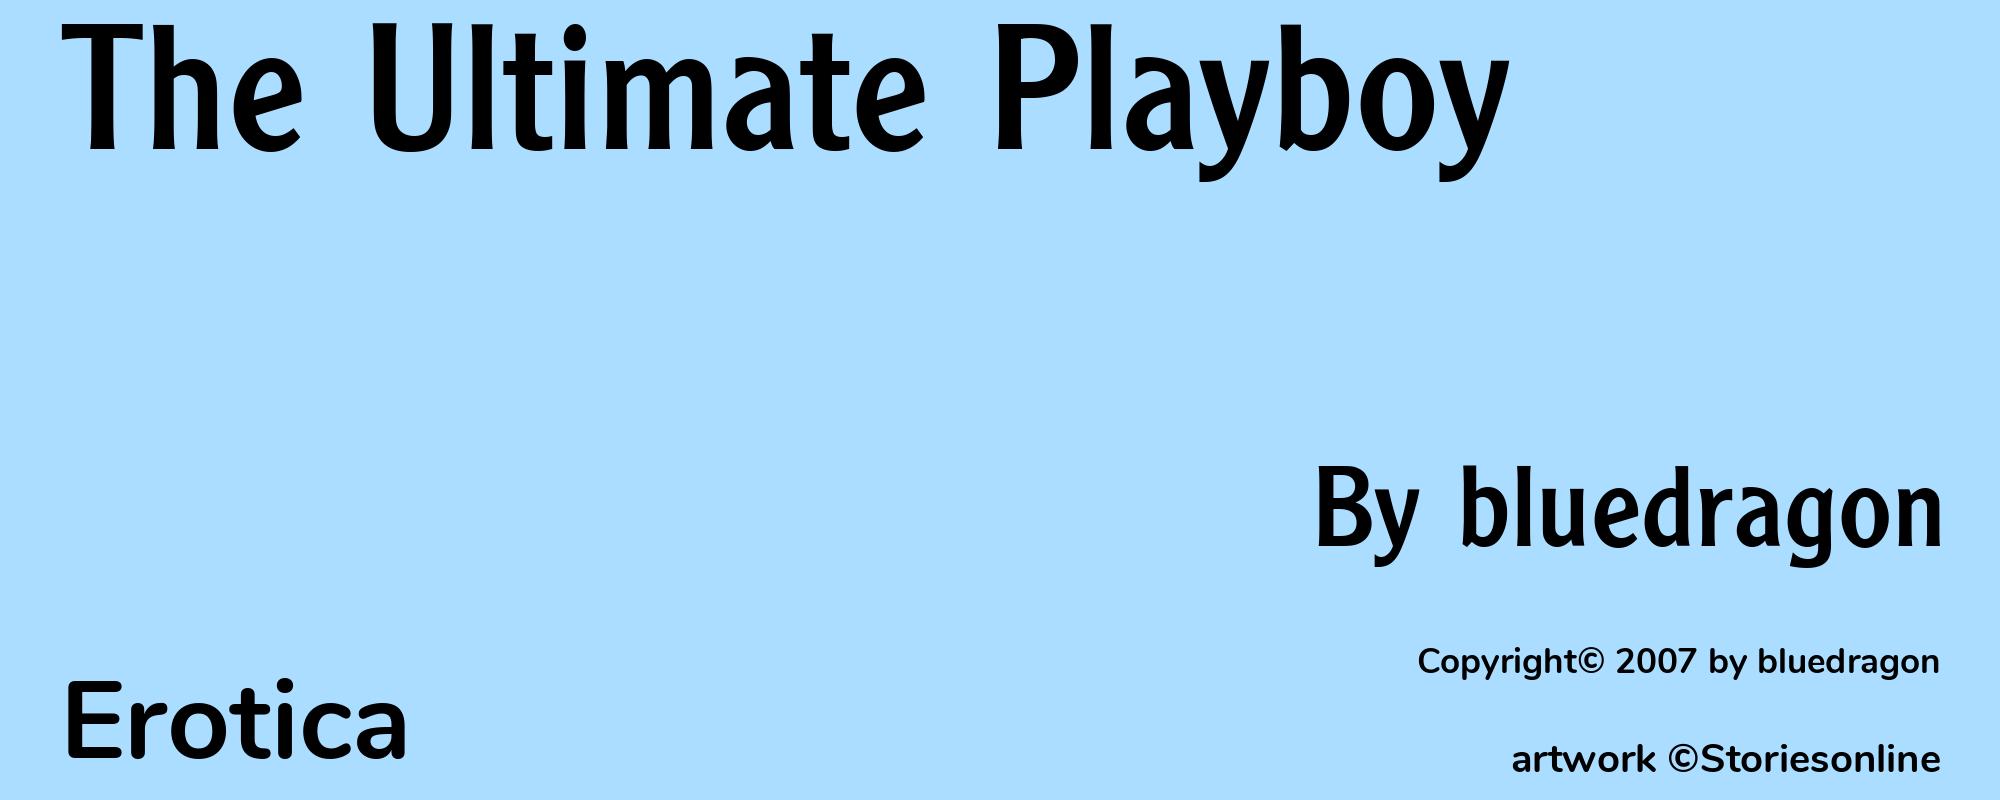 The Ultimate Playboy - Cover